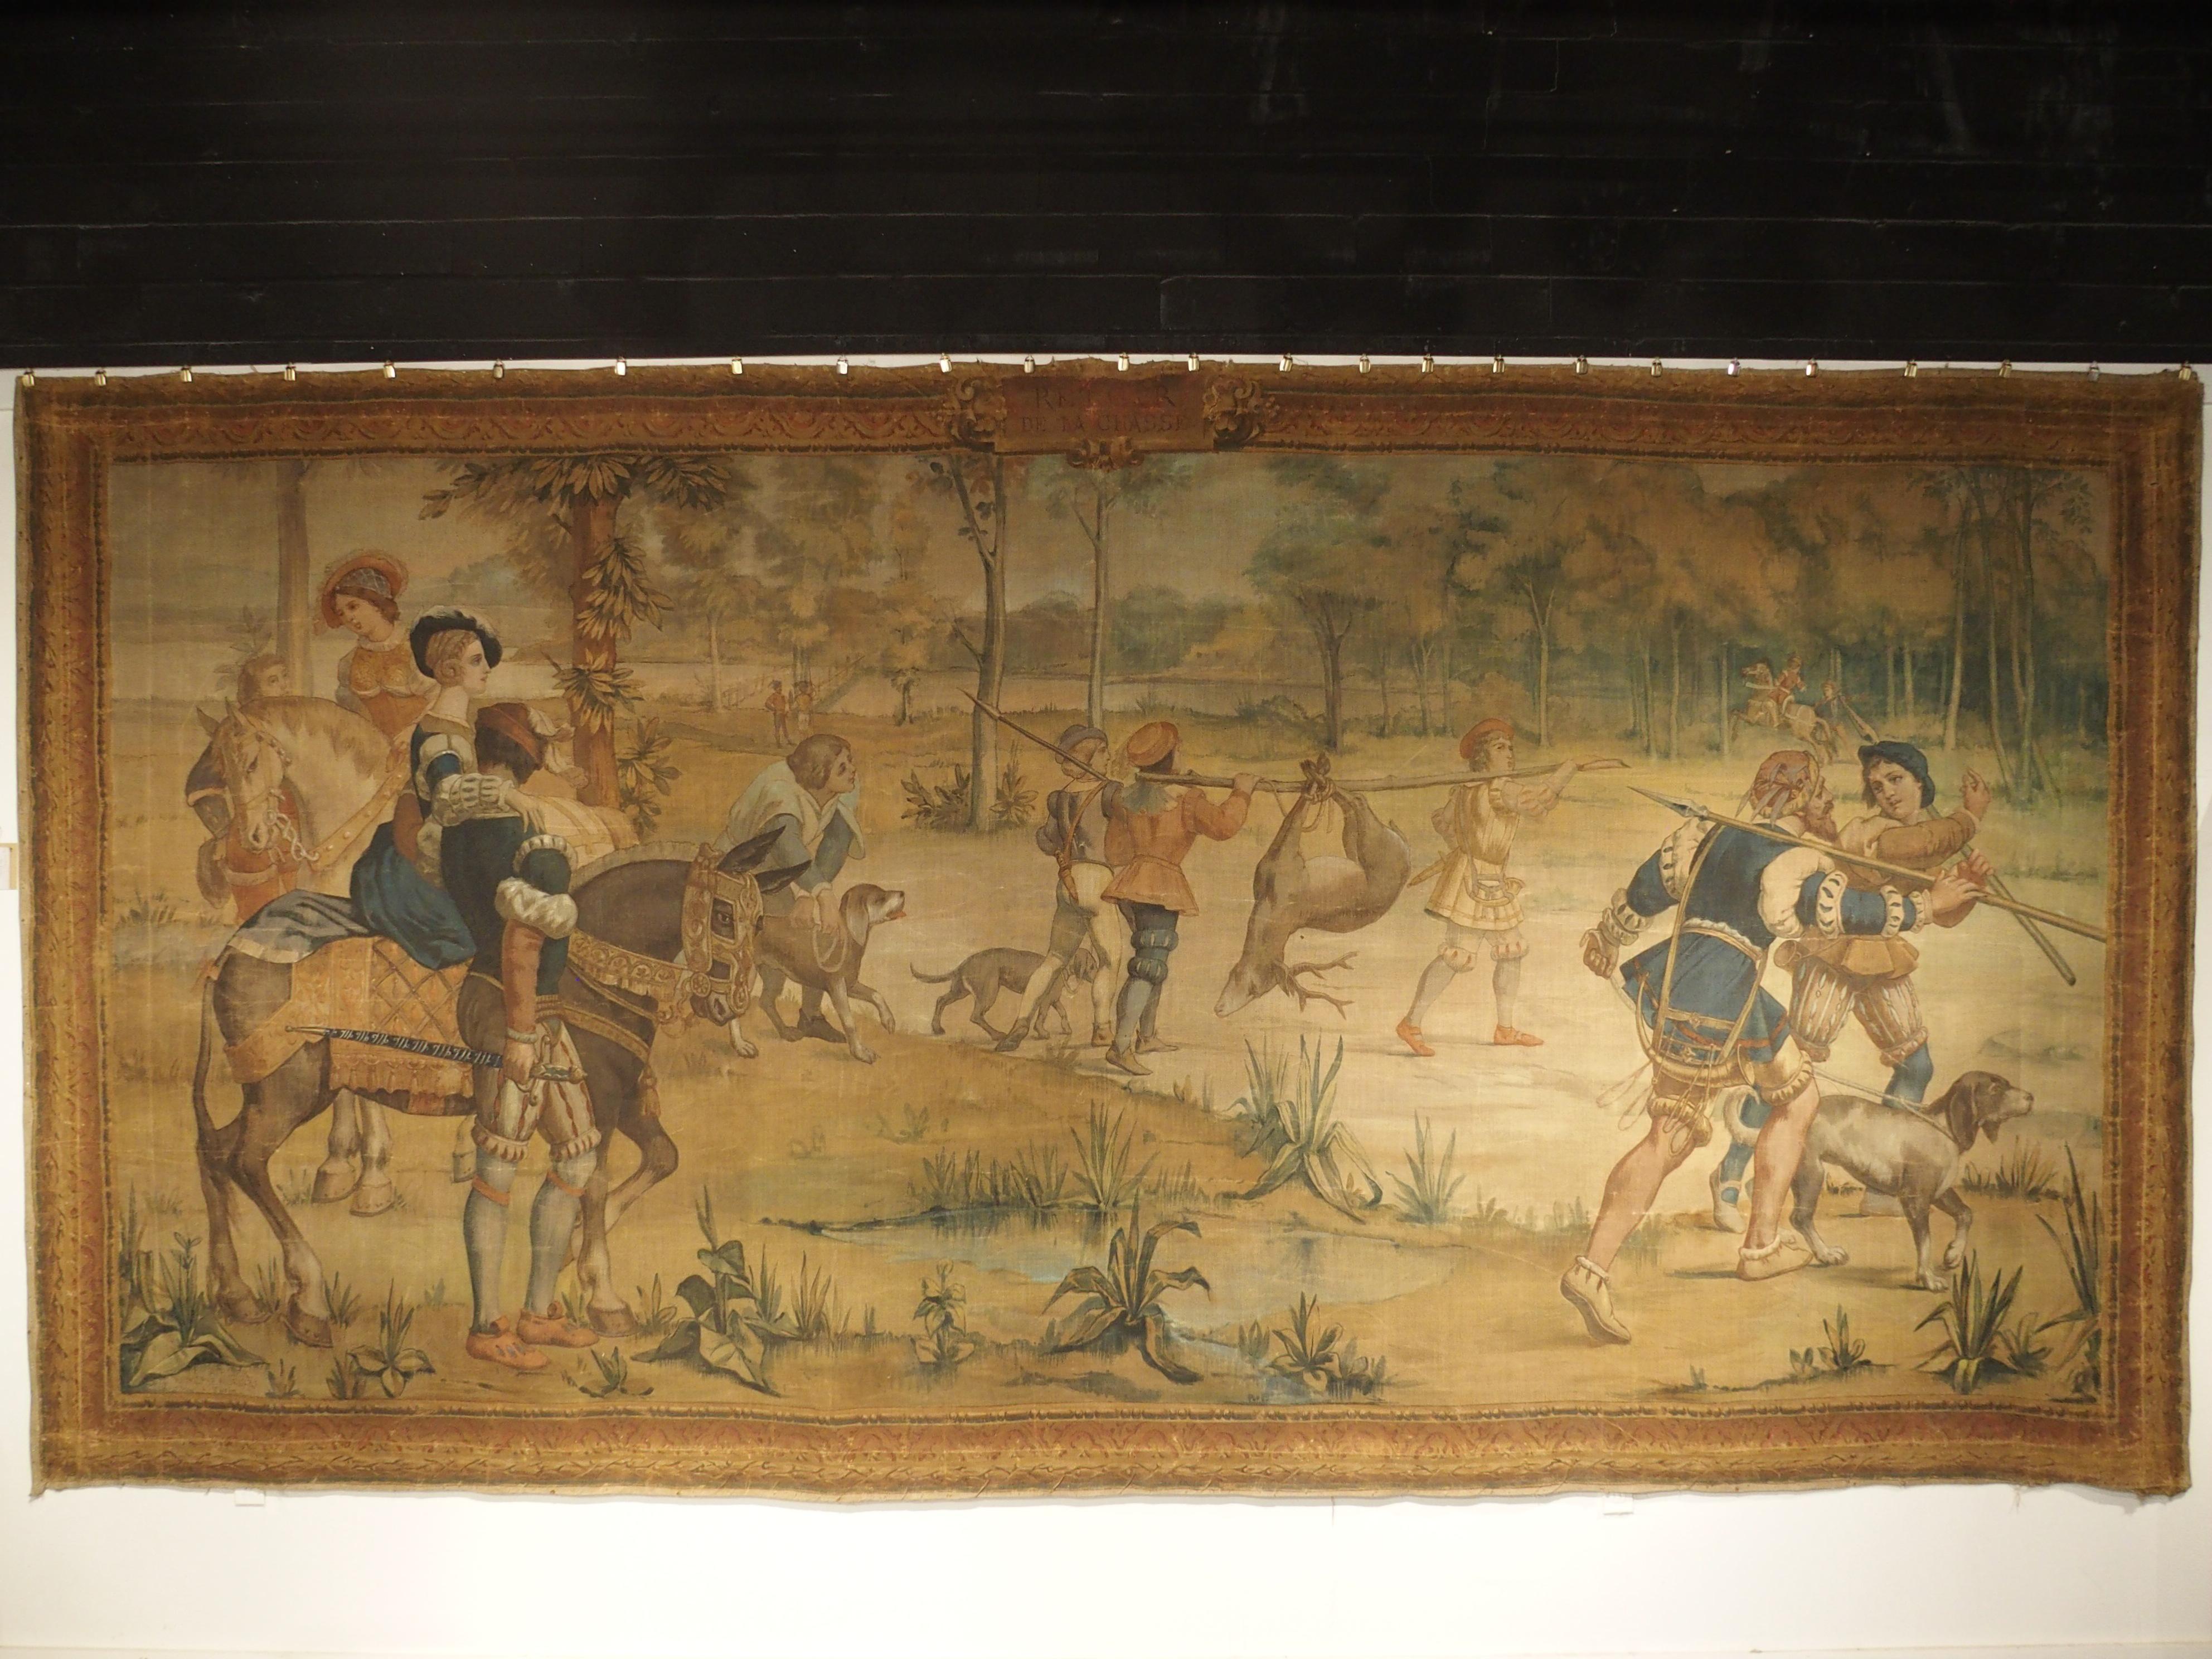 Hand-Painted Massive Antique Italian Painted Canvas of a Hunt Scene, 19th Century